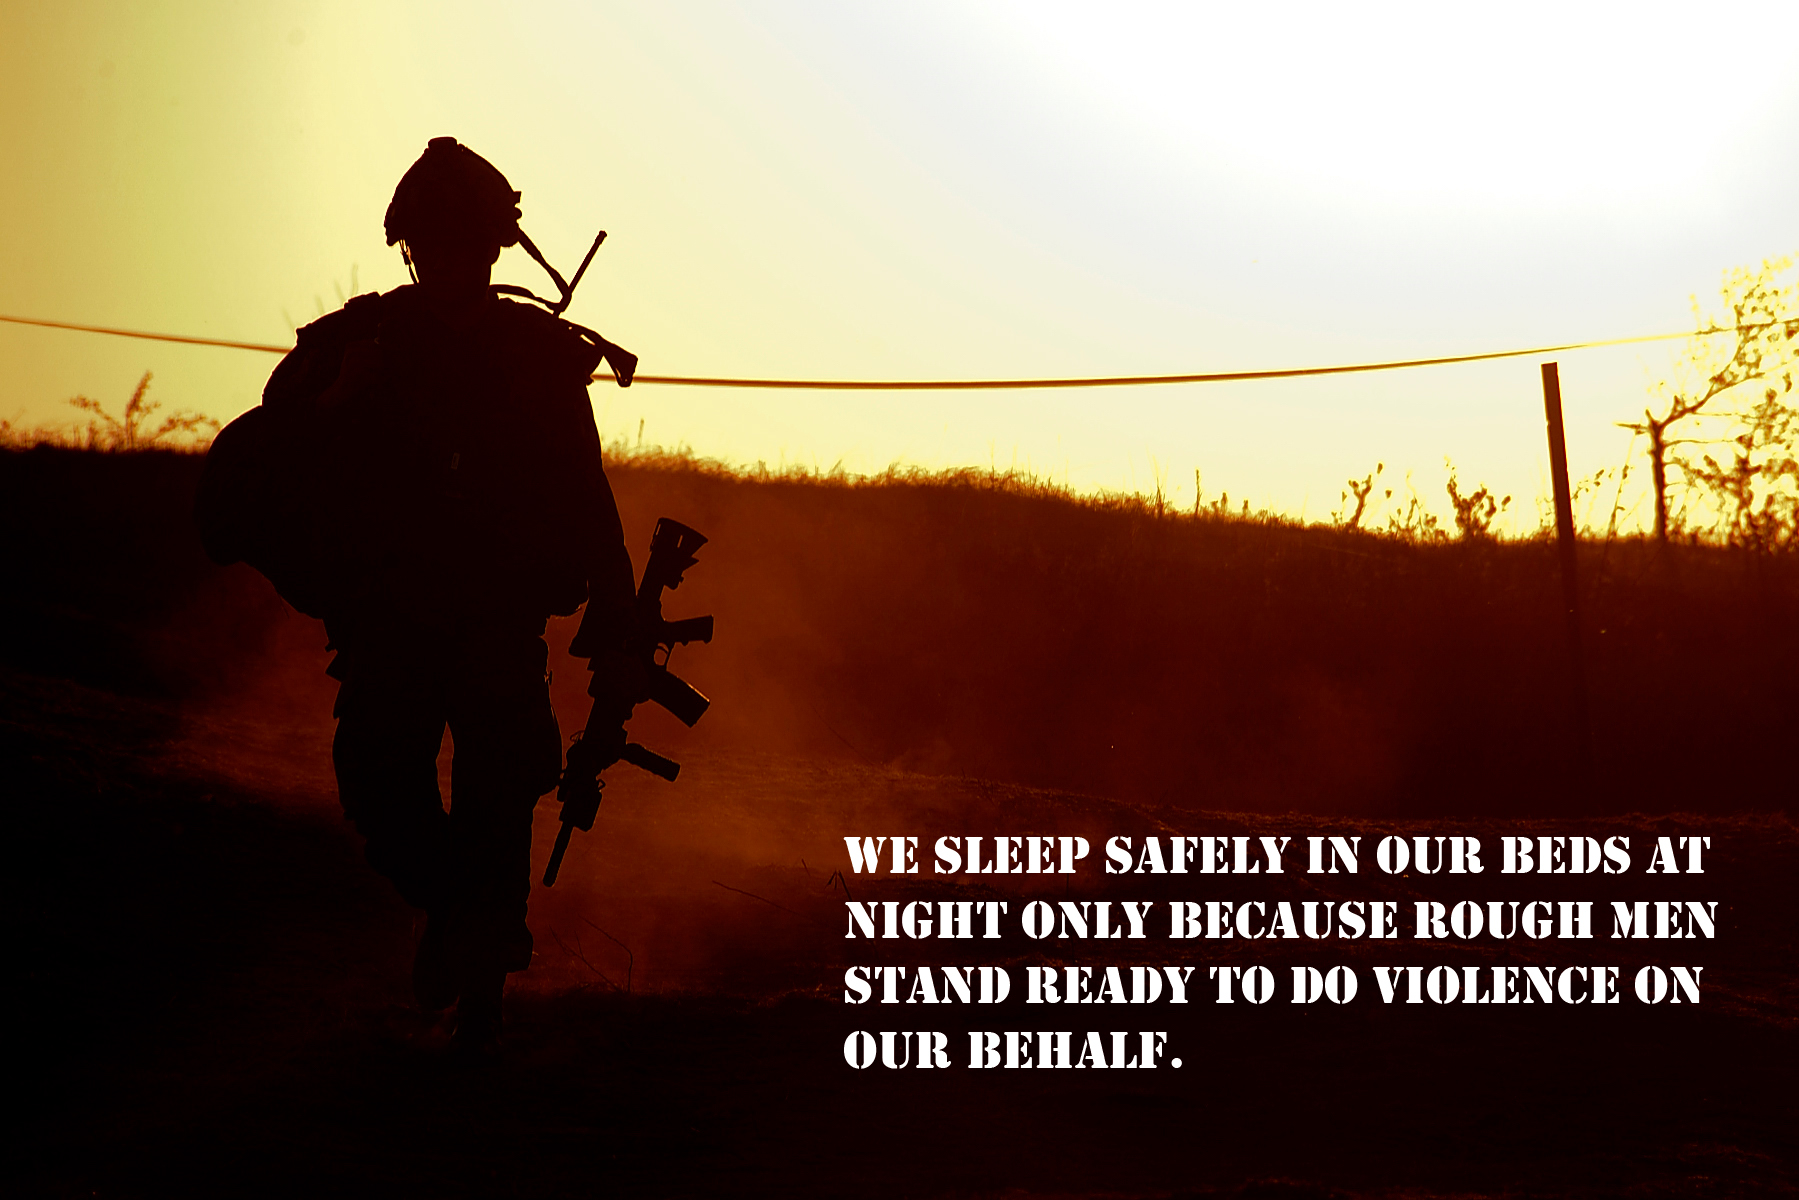 Military Quotes Wallpaper 1080p On Wallpaper Hd 1799 - Military Backgrounds With Quotes - HD Wallpaper 